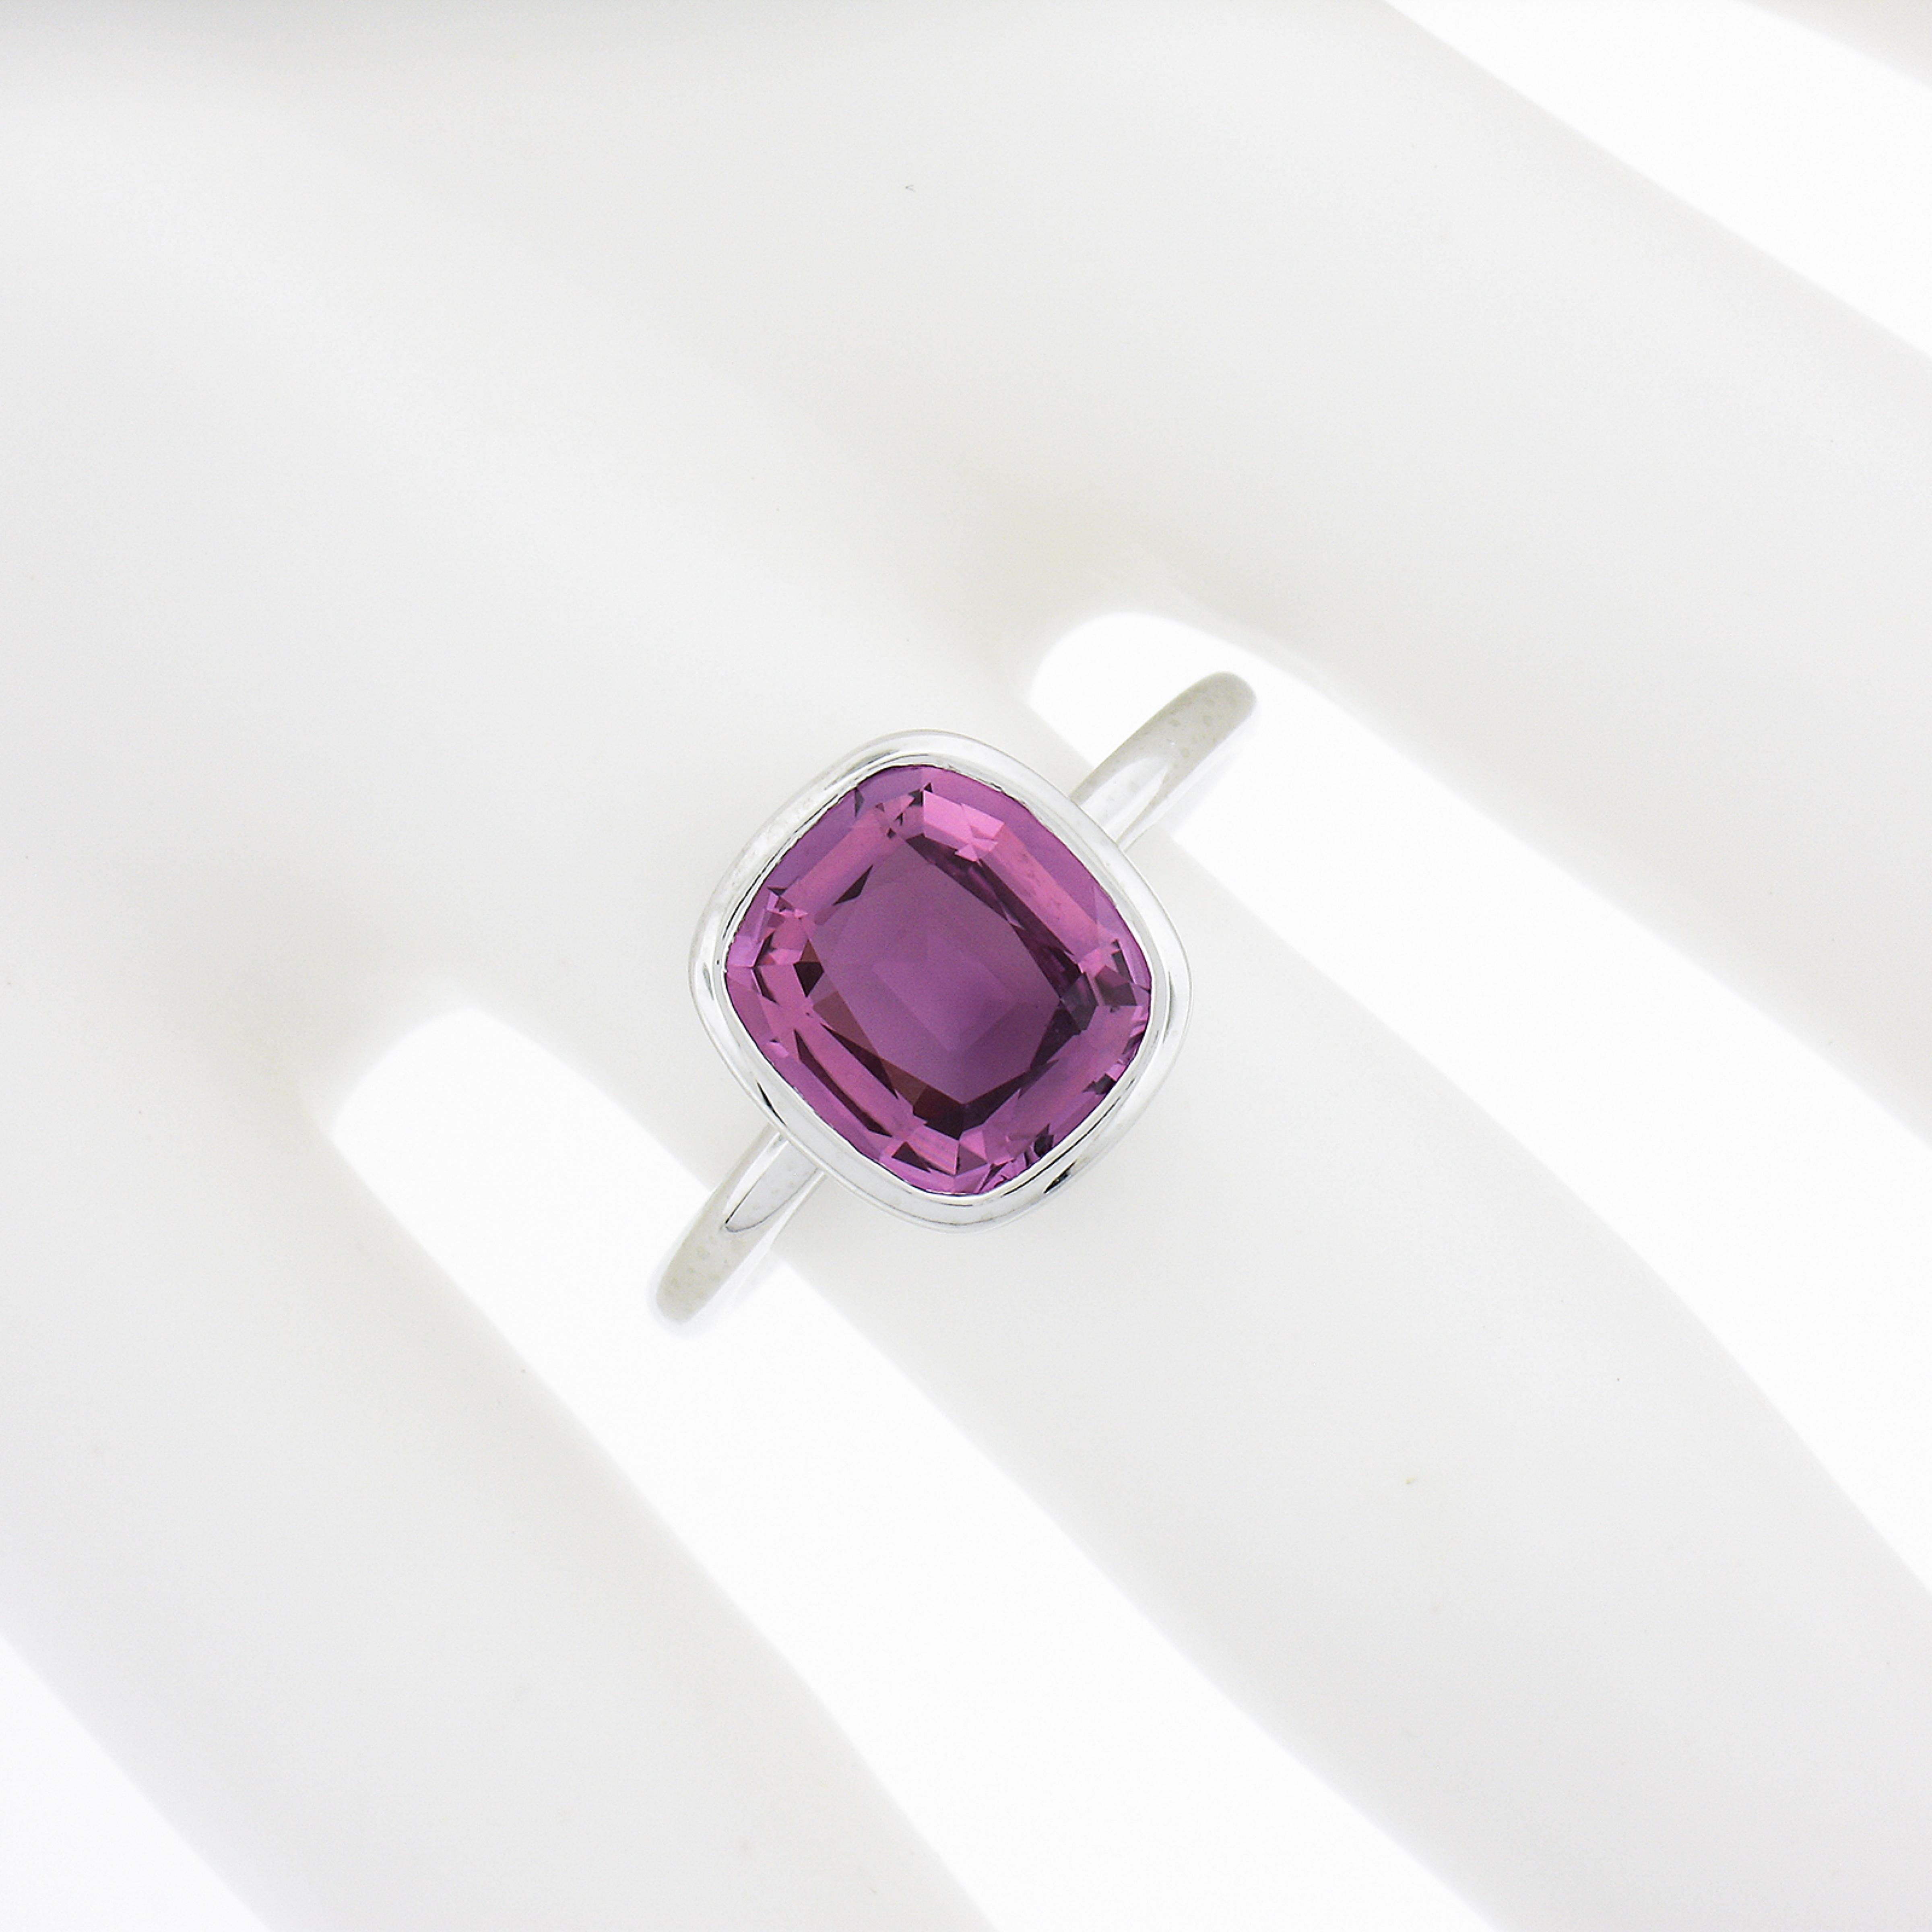 Cushion Cut NEW Platinum GIA Graded 2.89ct Bezel Set Purple Pink Sapphire Solitaire Ring For Sale